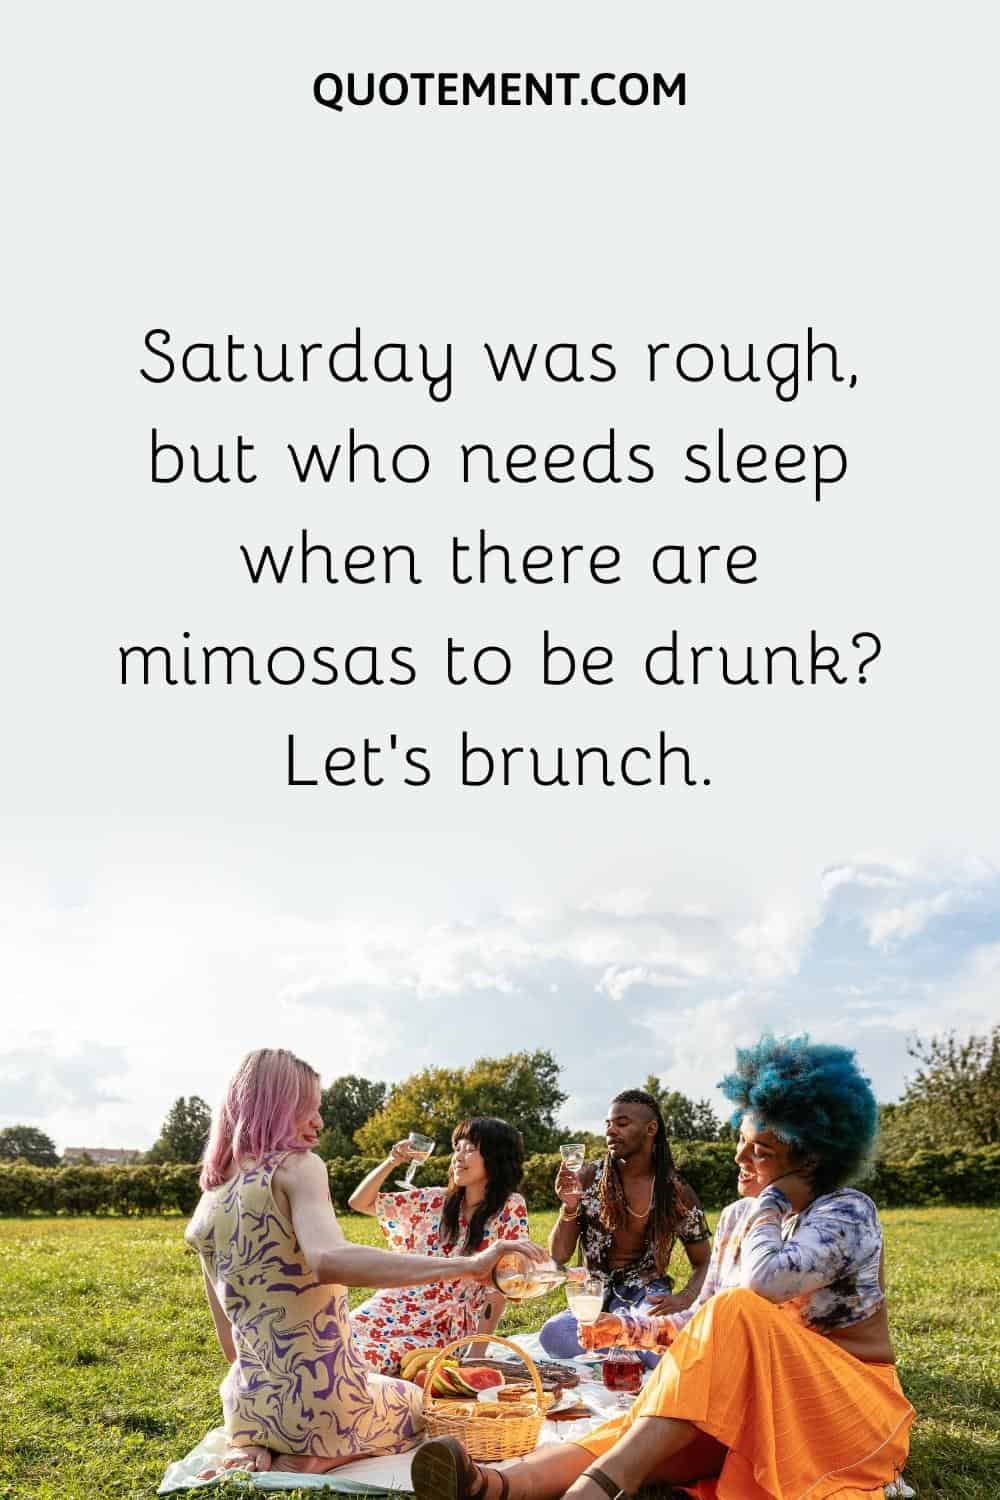 Saturday was rough, but who needs sleep when there are mimosas to be drunk Let’s brunch.